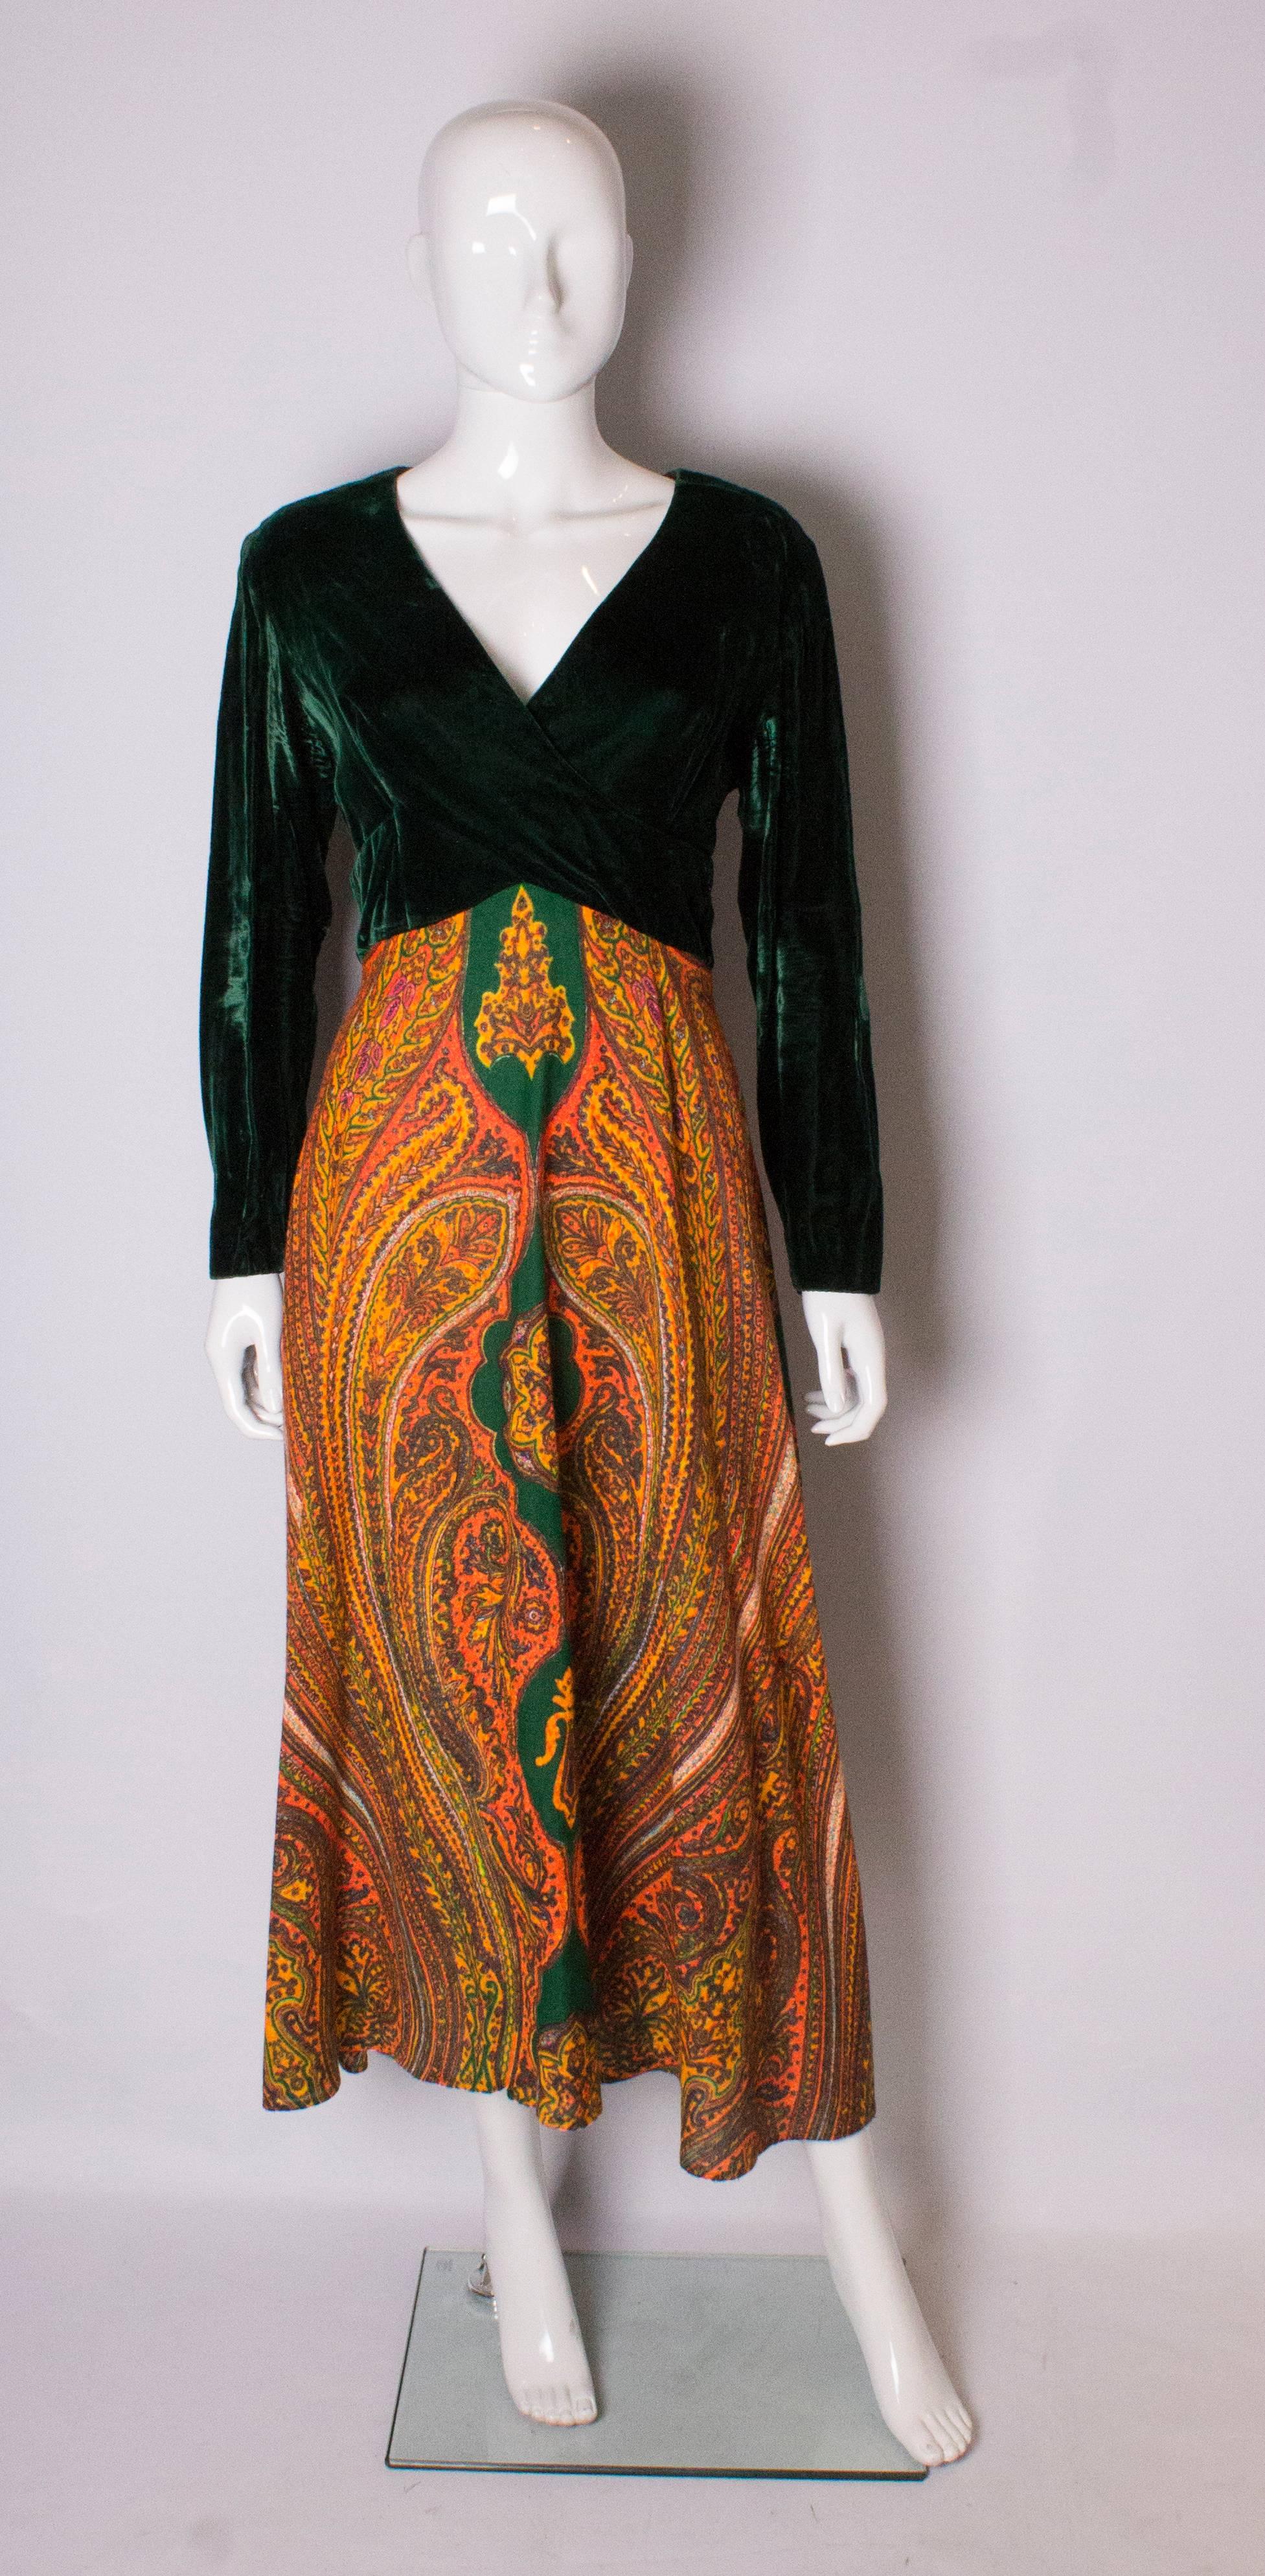 An easy to wear vintage gown. The dress has a green velvet top part with v cross over neckline. The skirt is an A line orange print.